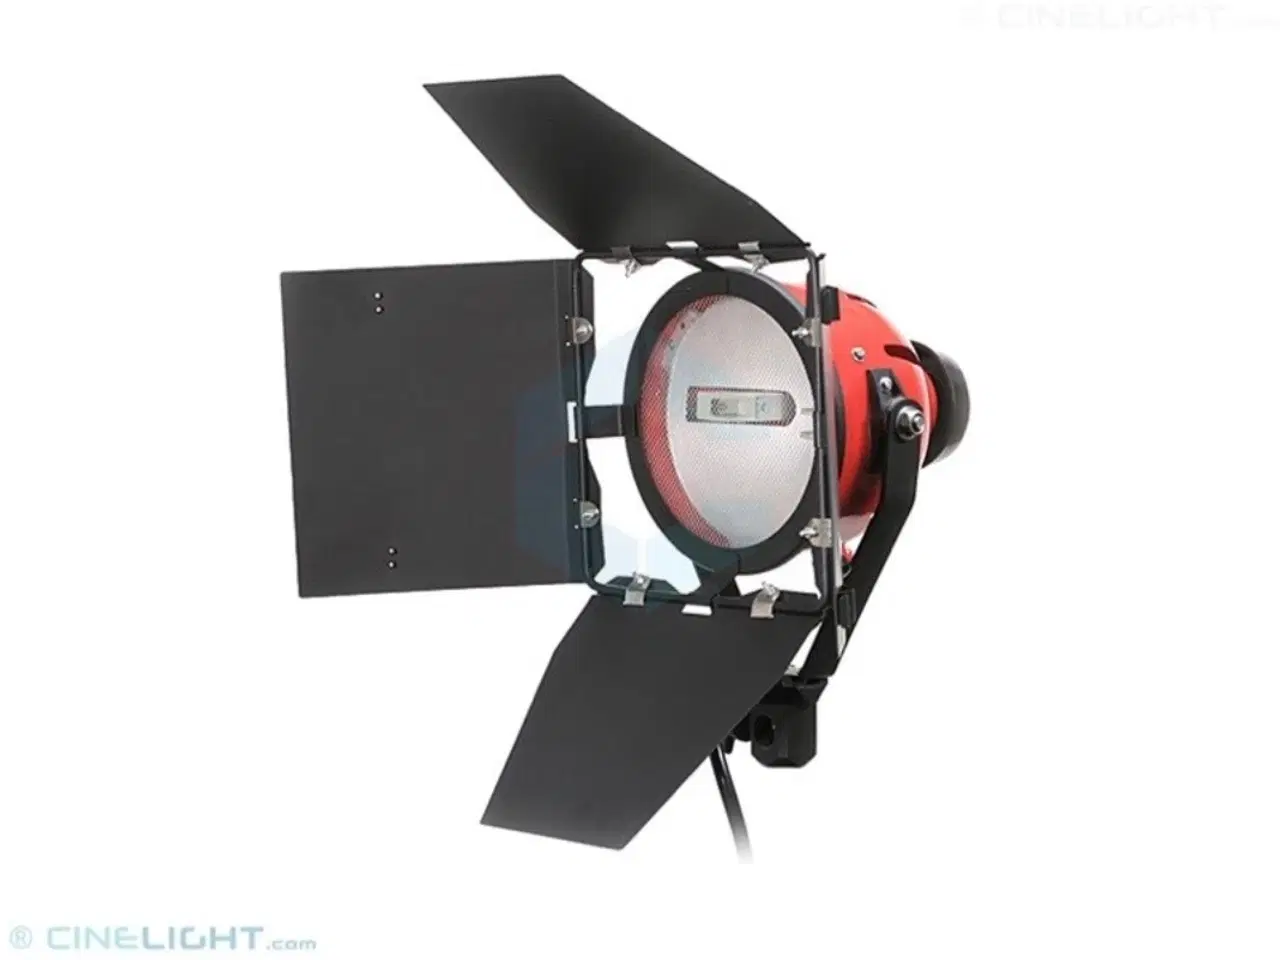 Billede 5 - 3 REDHEAD STUDIO lights with dimmer switches